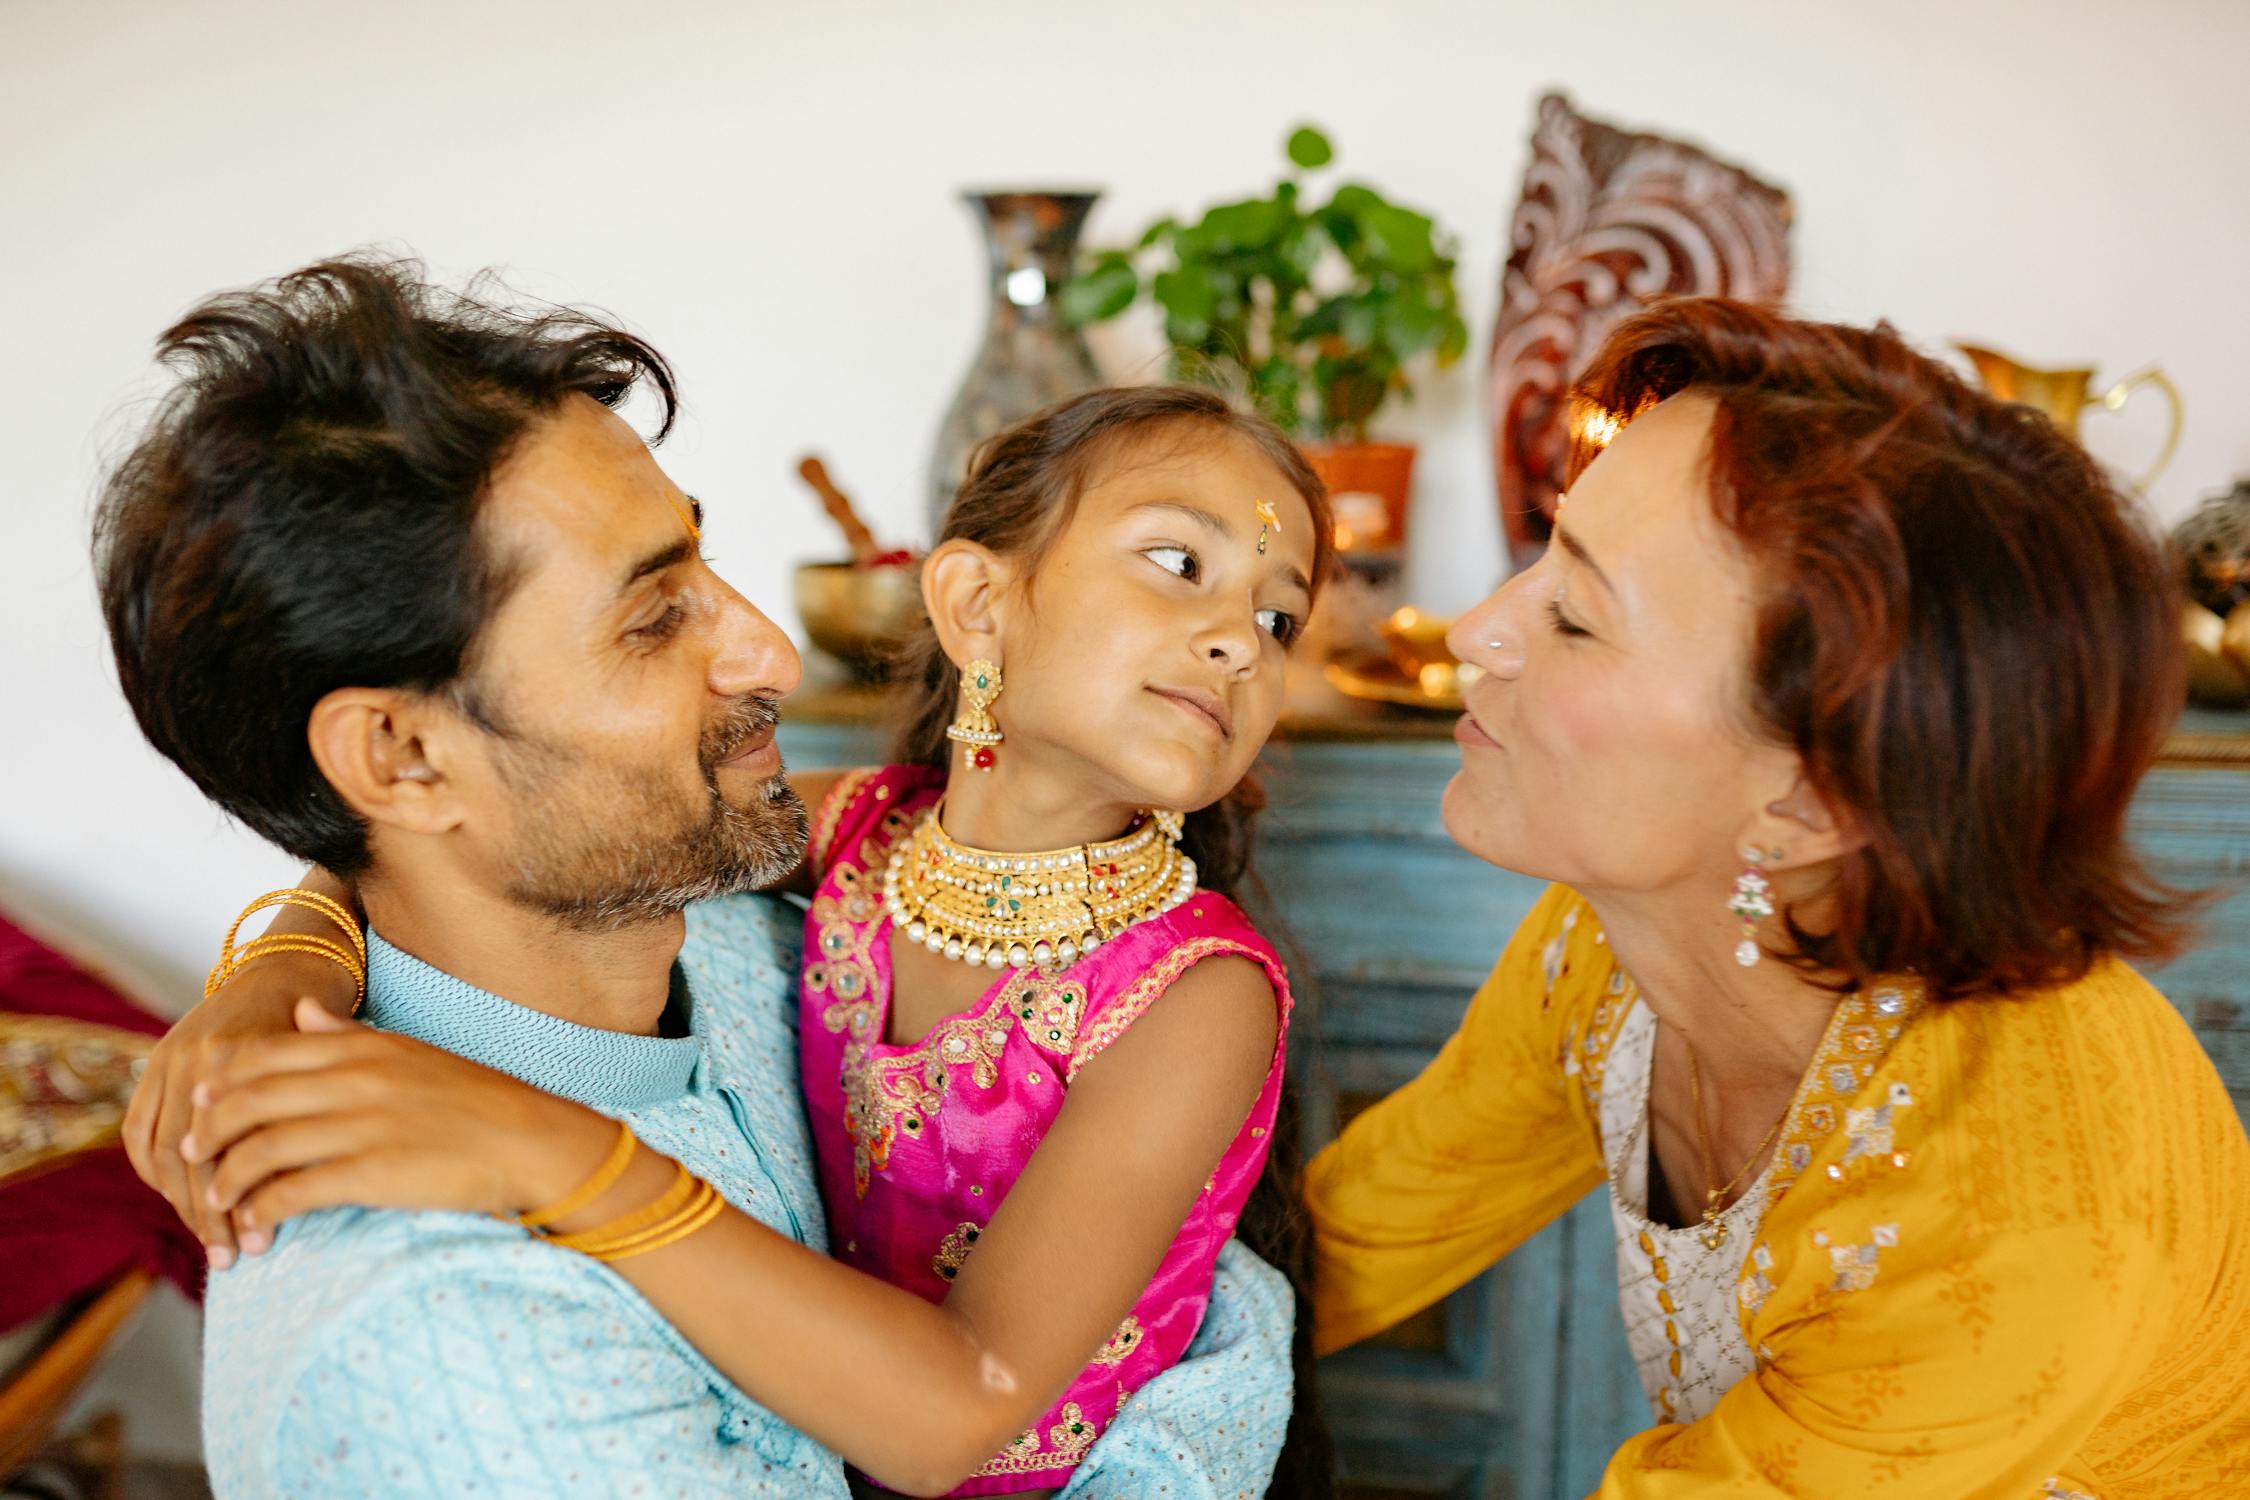 Indian Family Photo by Yan Krukau from Pexels: https://www.pexels.com/photo/a-happy-loving-family-8819155/